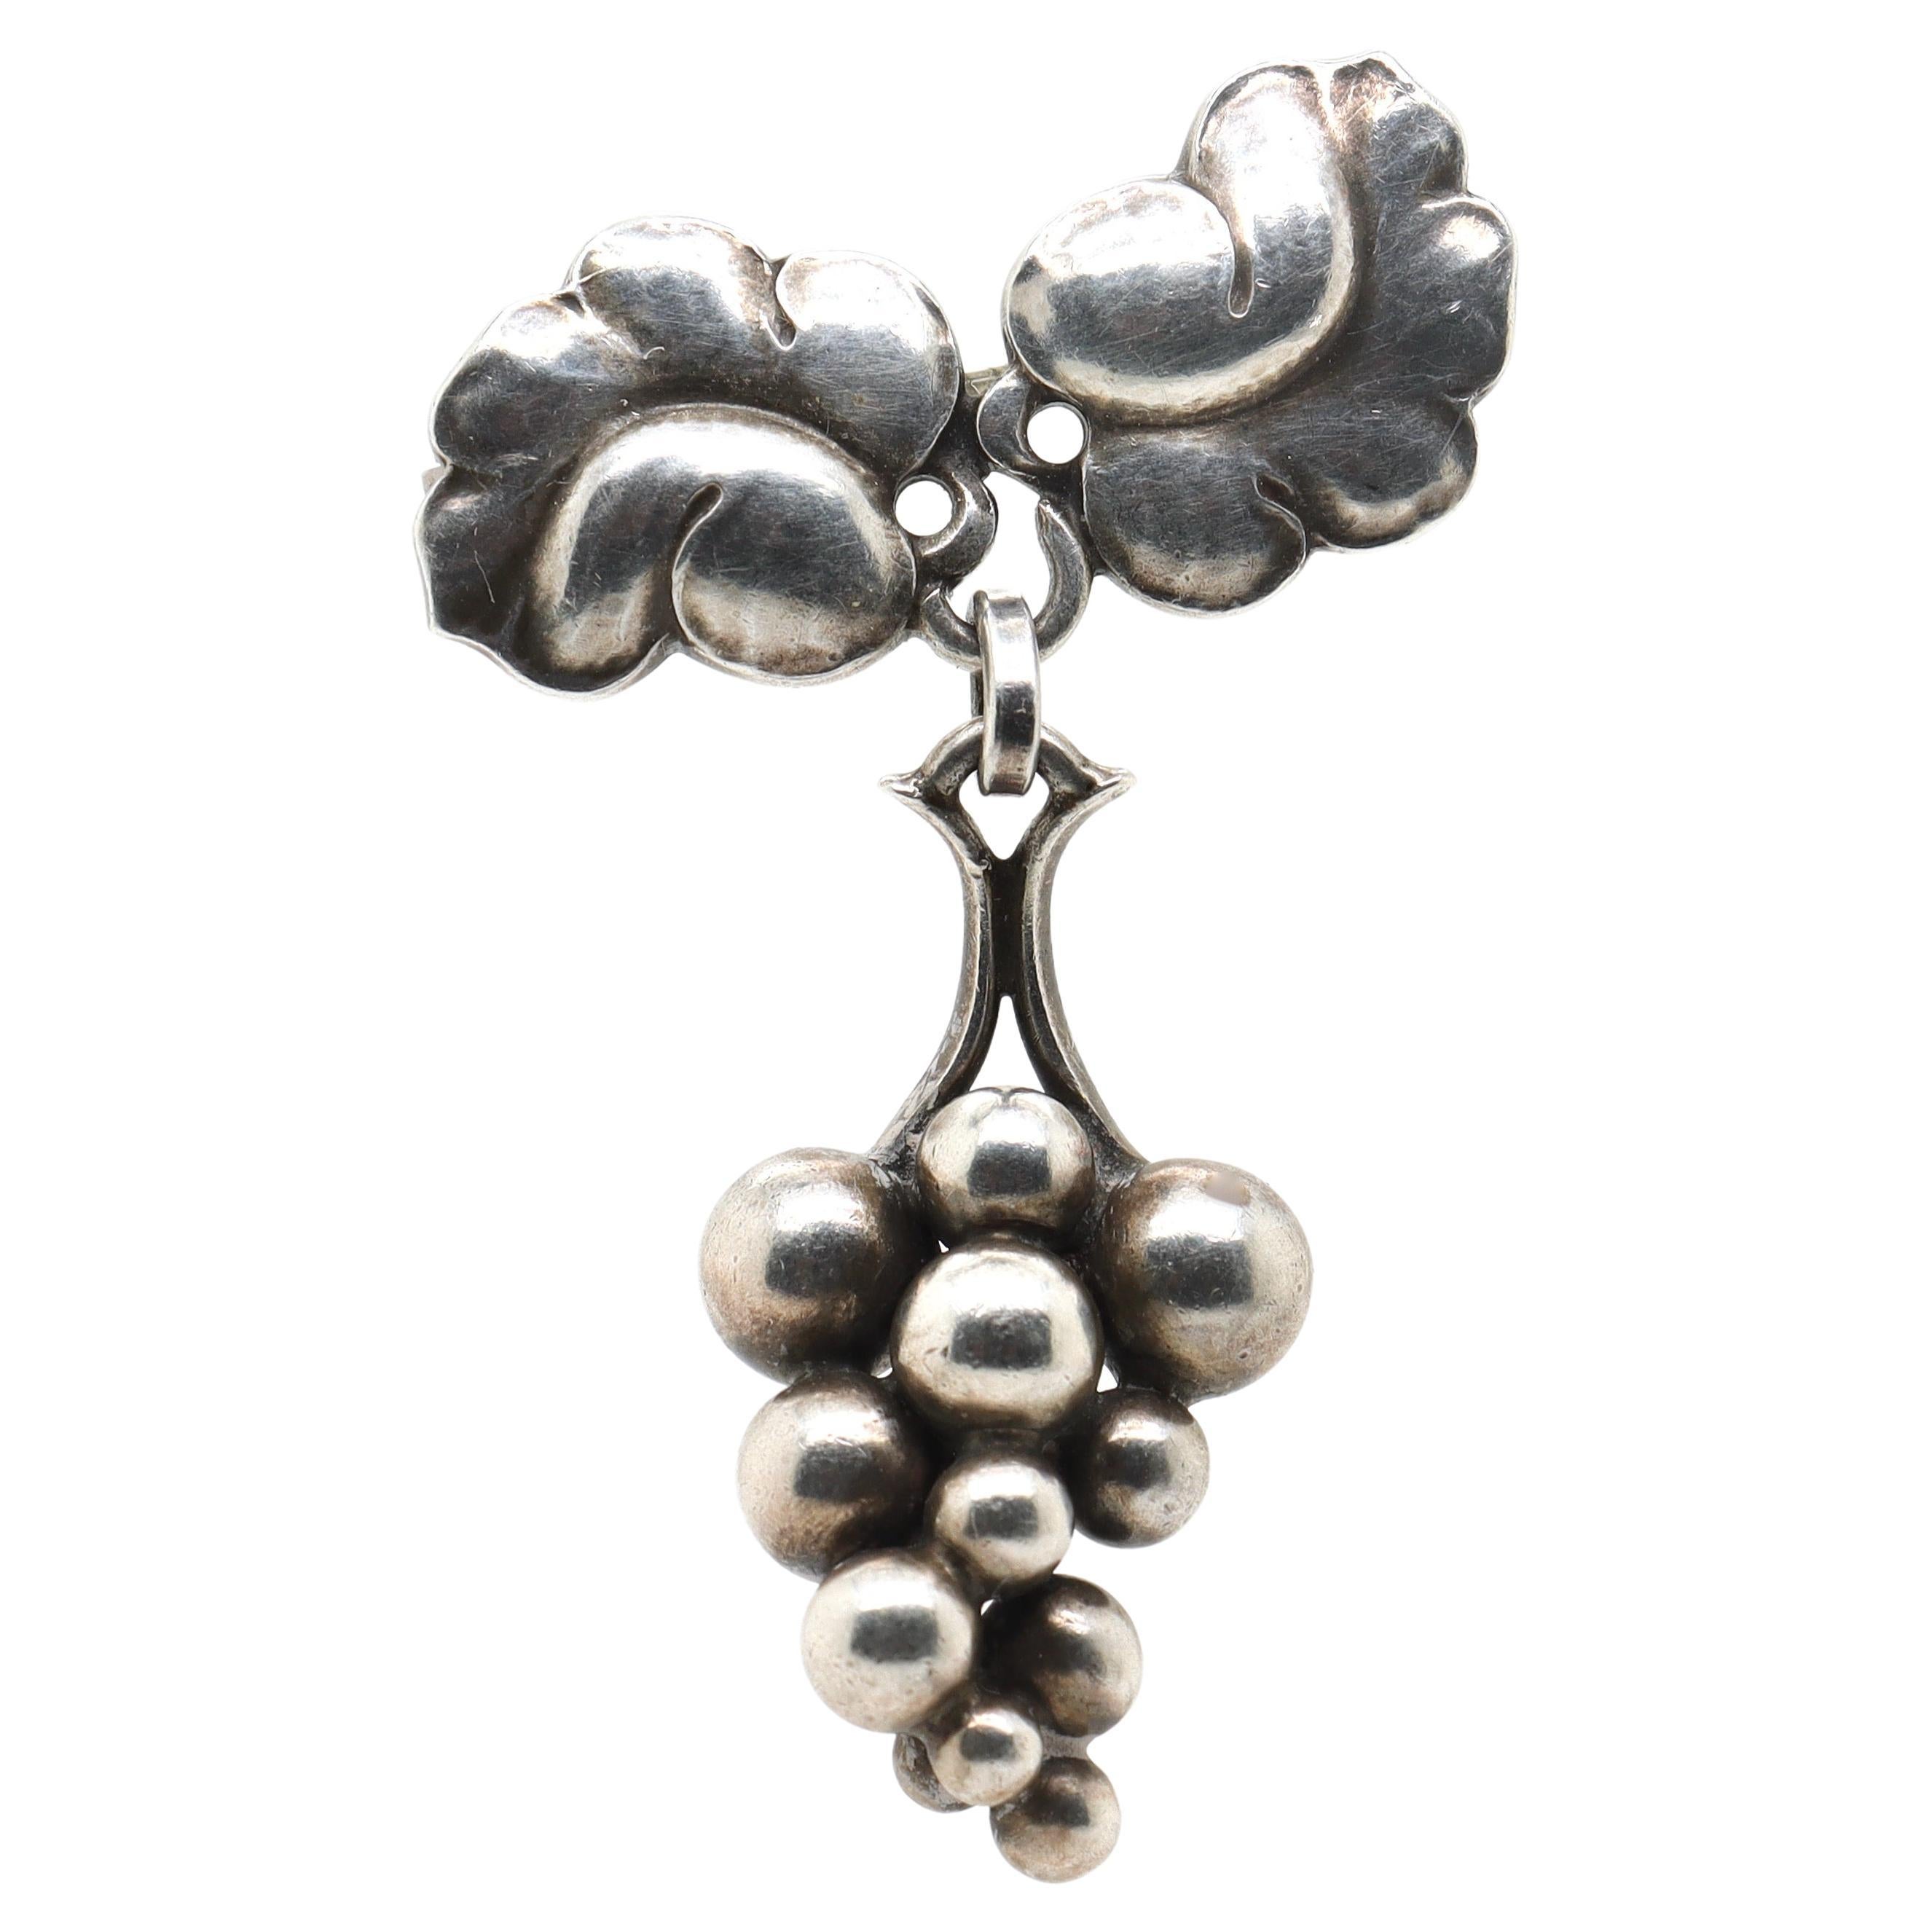 Georg Jensen Sterling Silver "Grapes" Brooch or Pin No. 217A For Sale